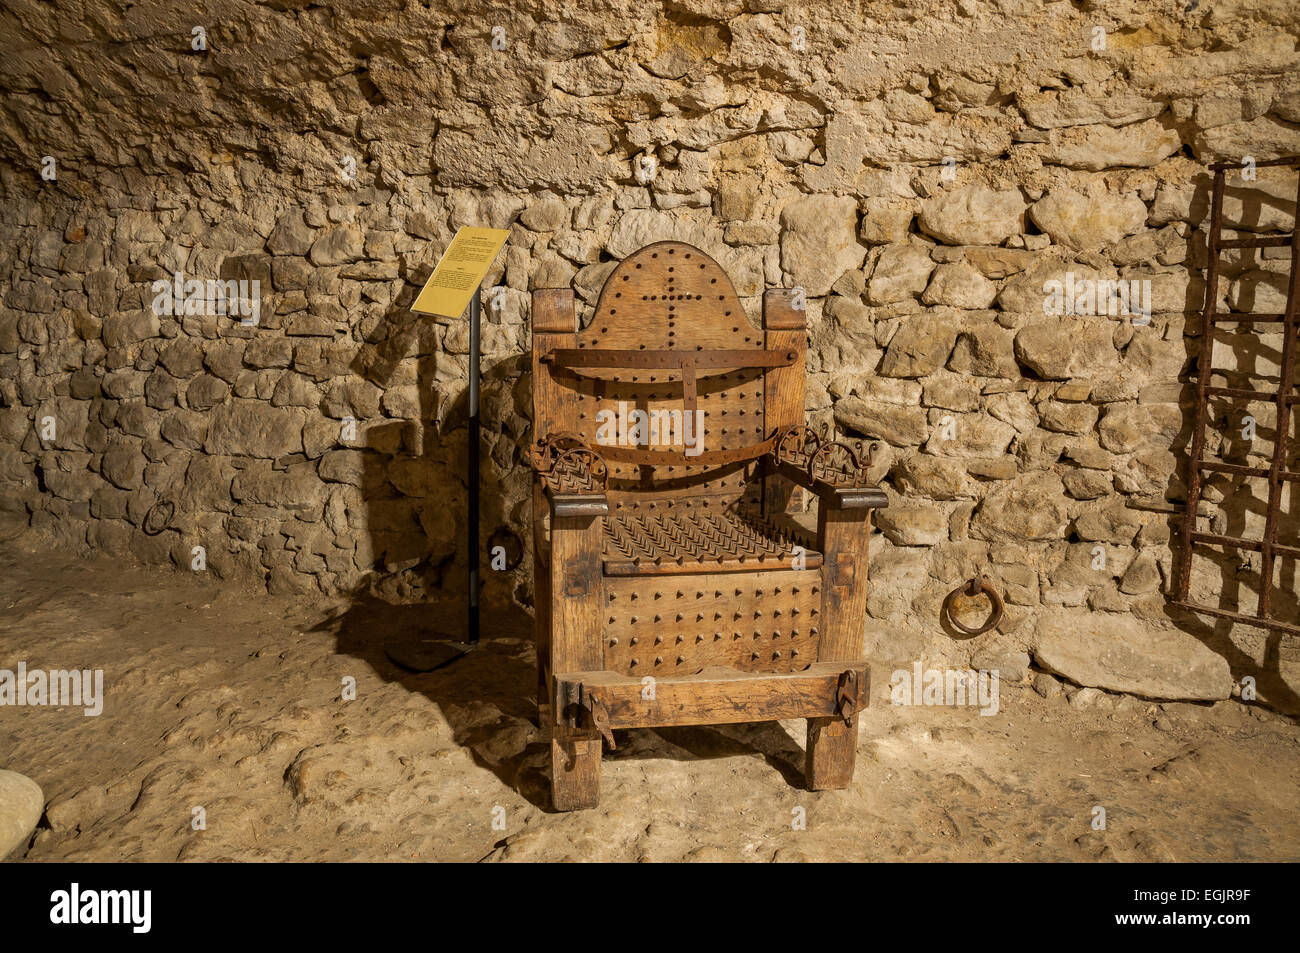 torture tools used in medieval age in italy Stock Photo